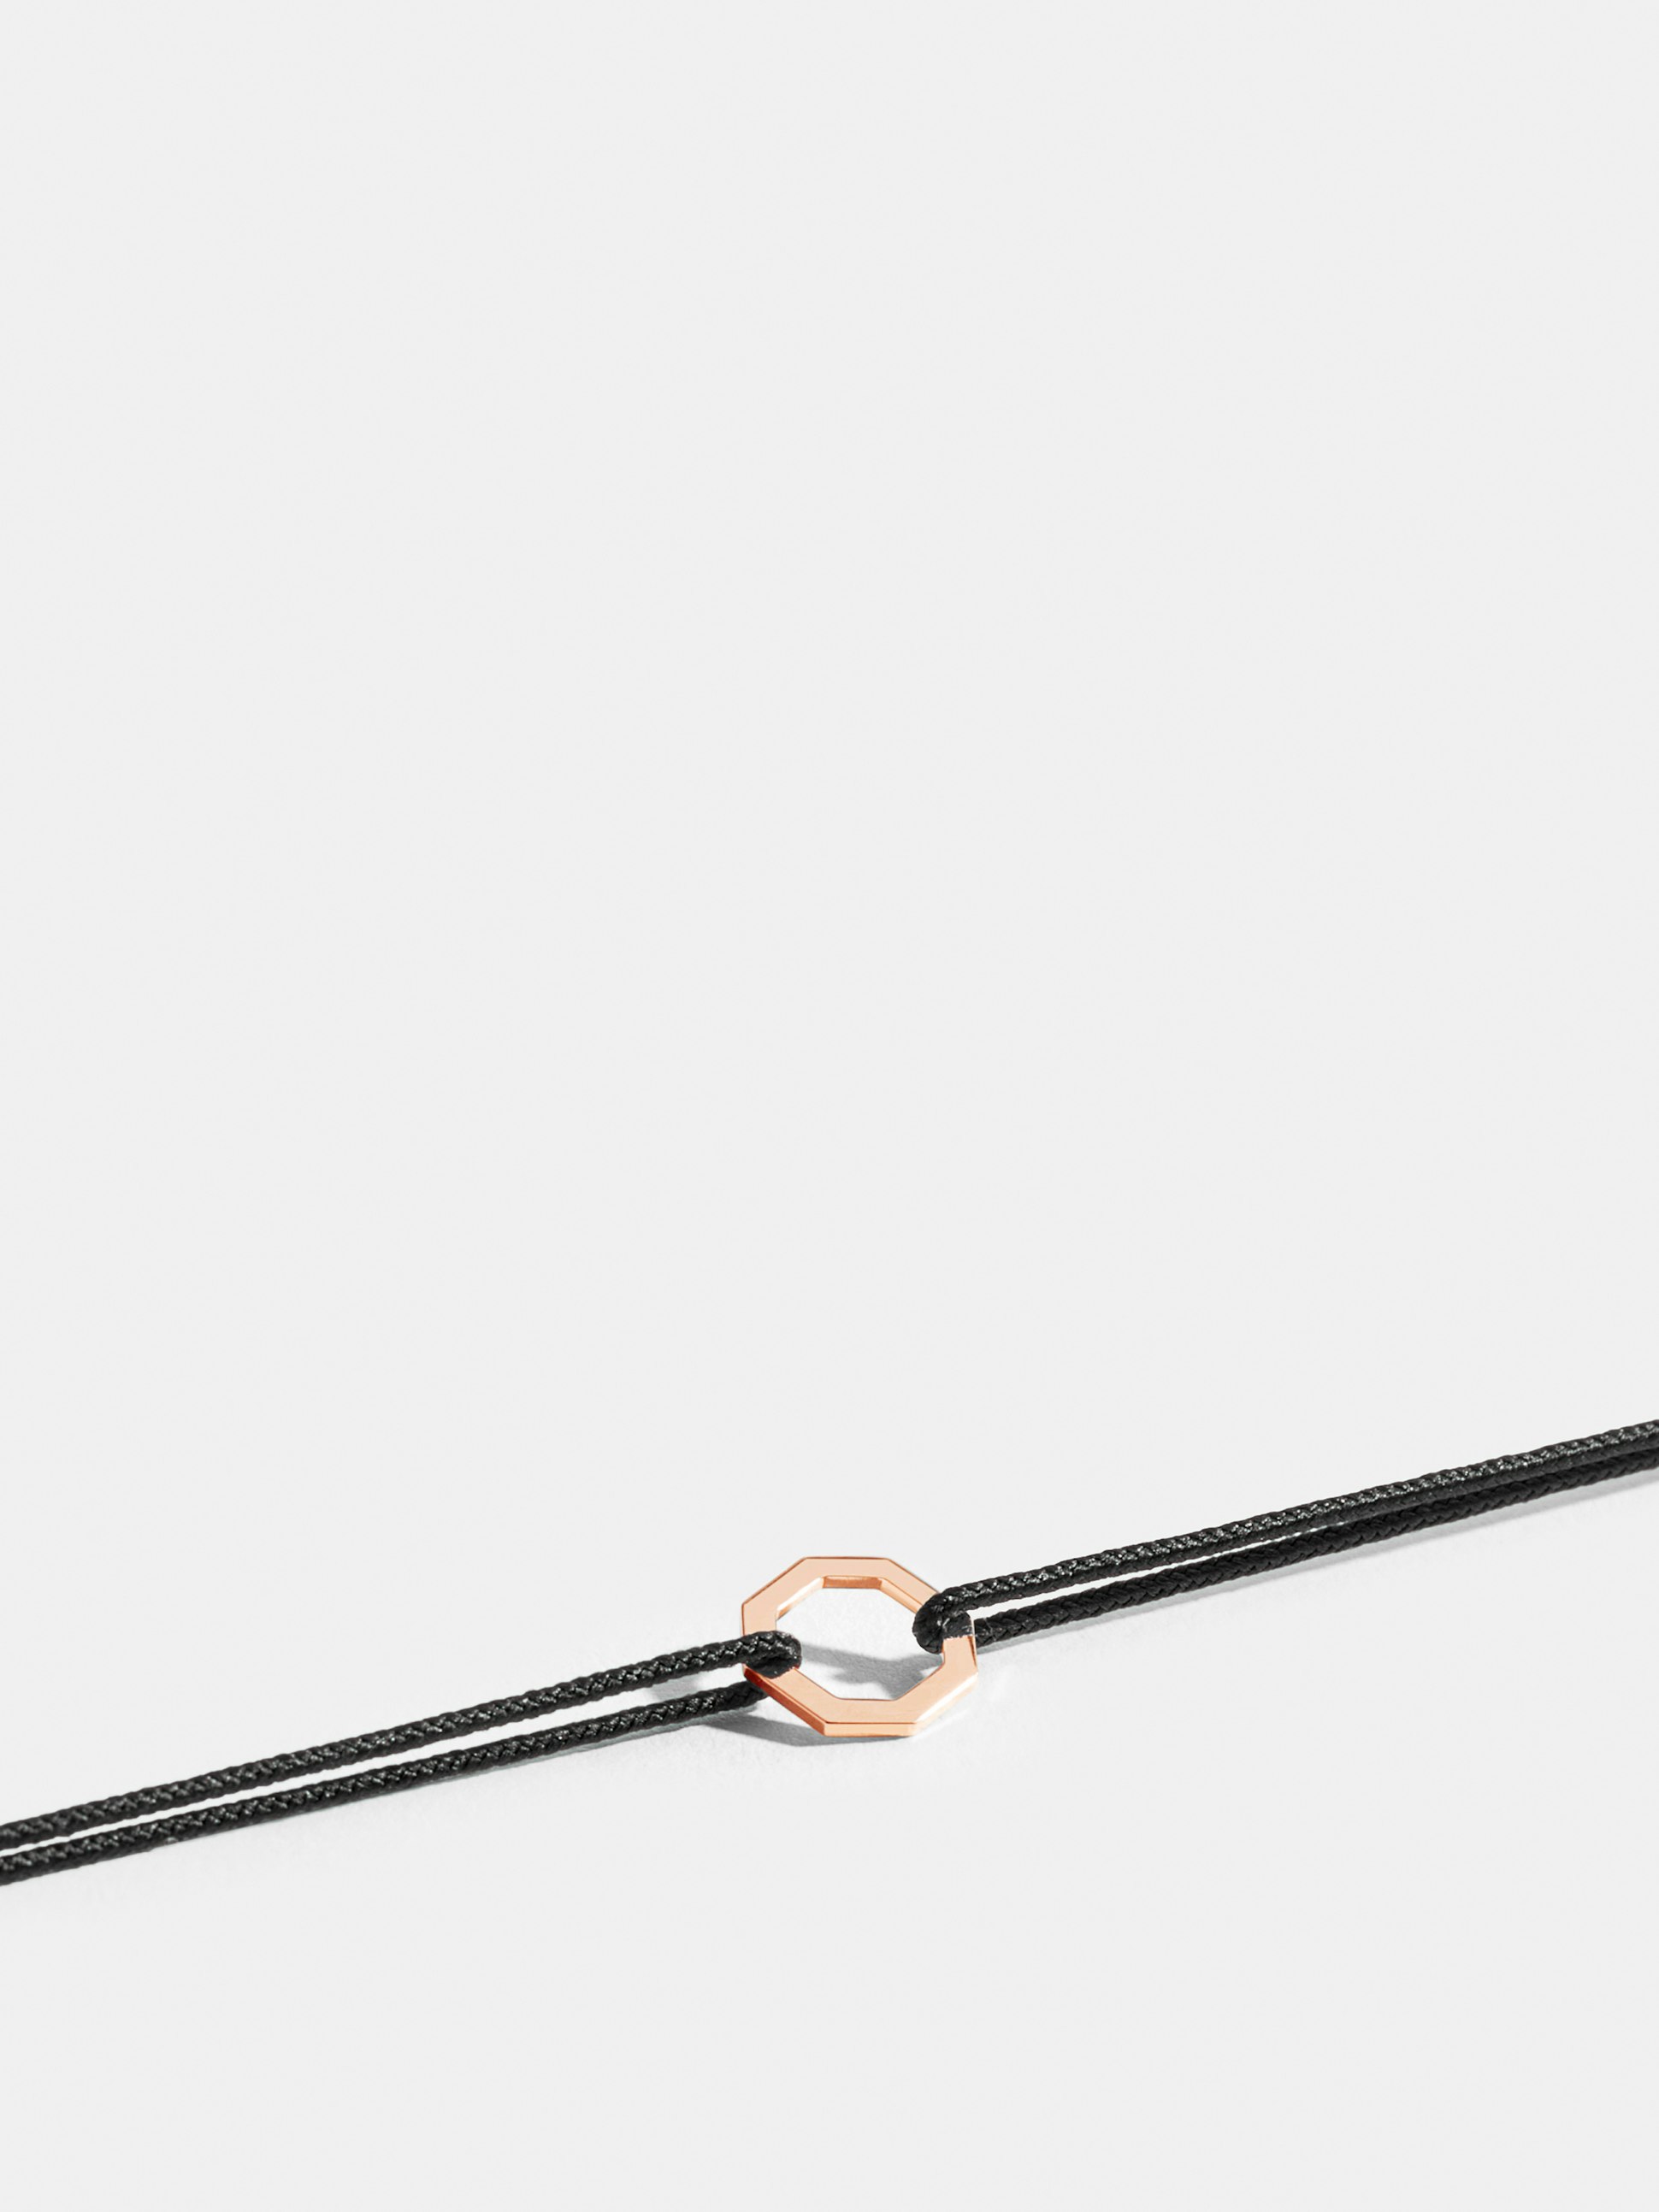 Octogone motif in 18k Fairmined ethical rose gold, on a cord. 